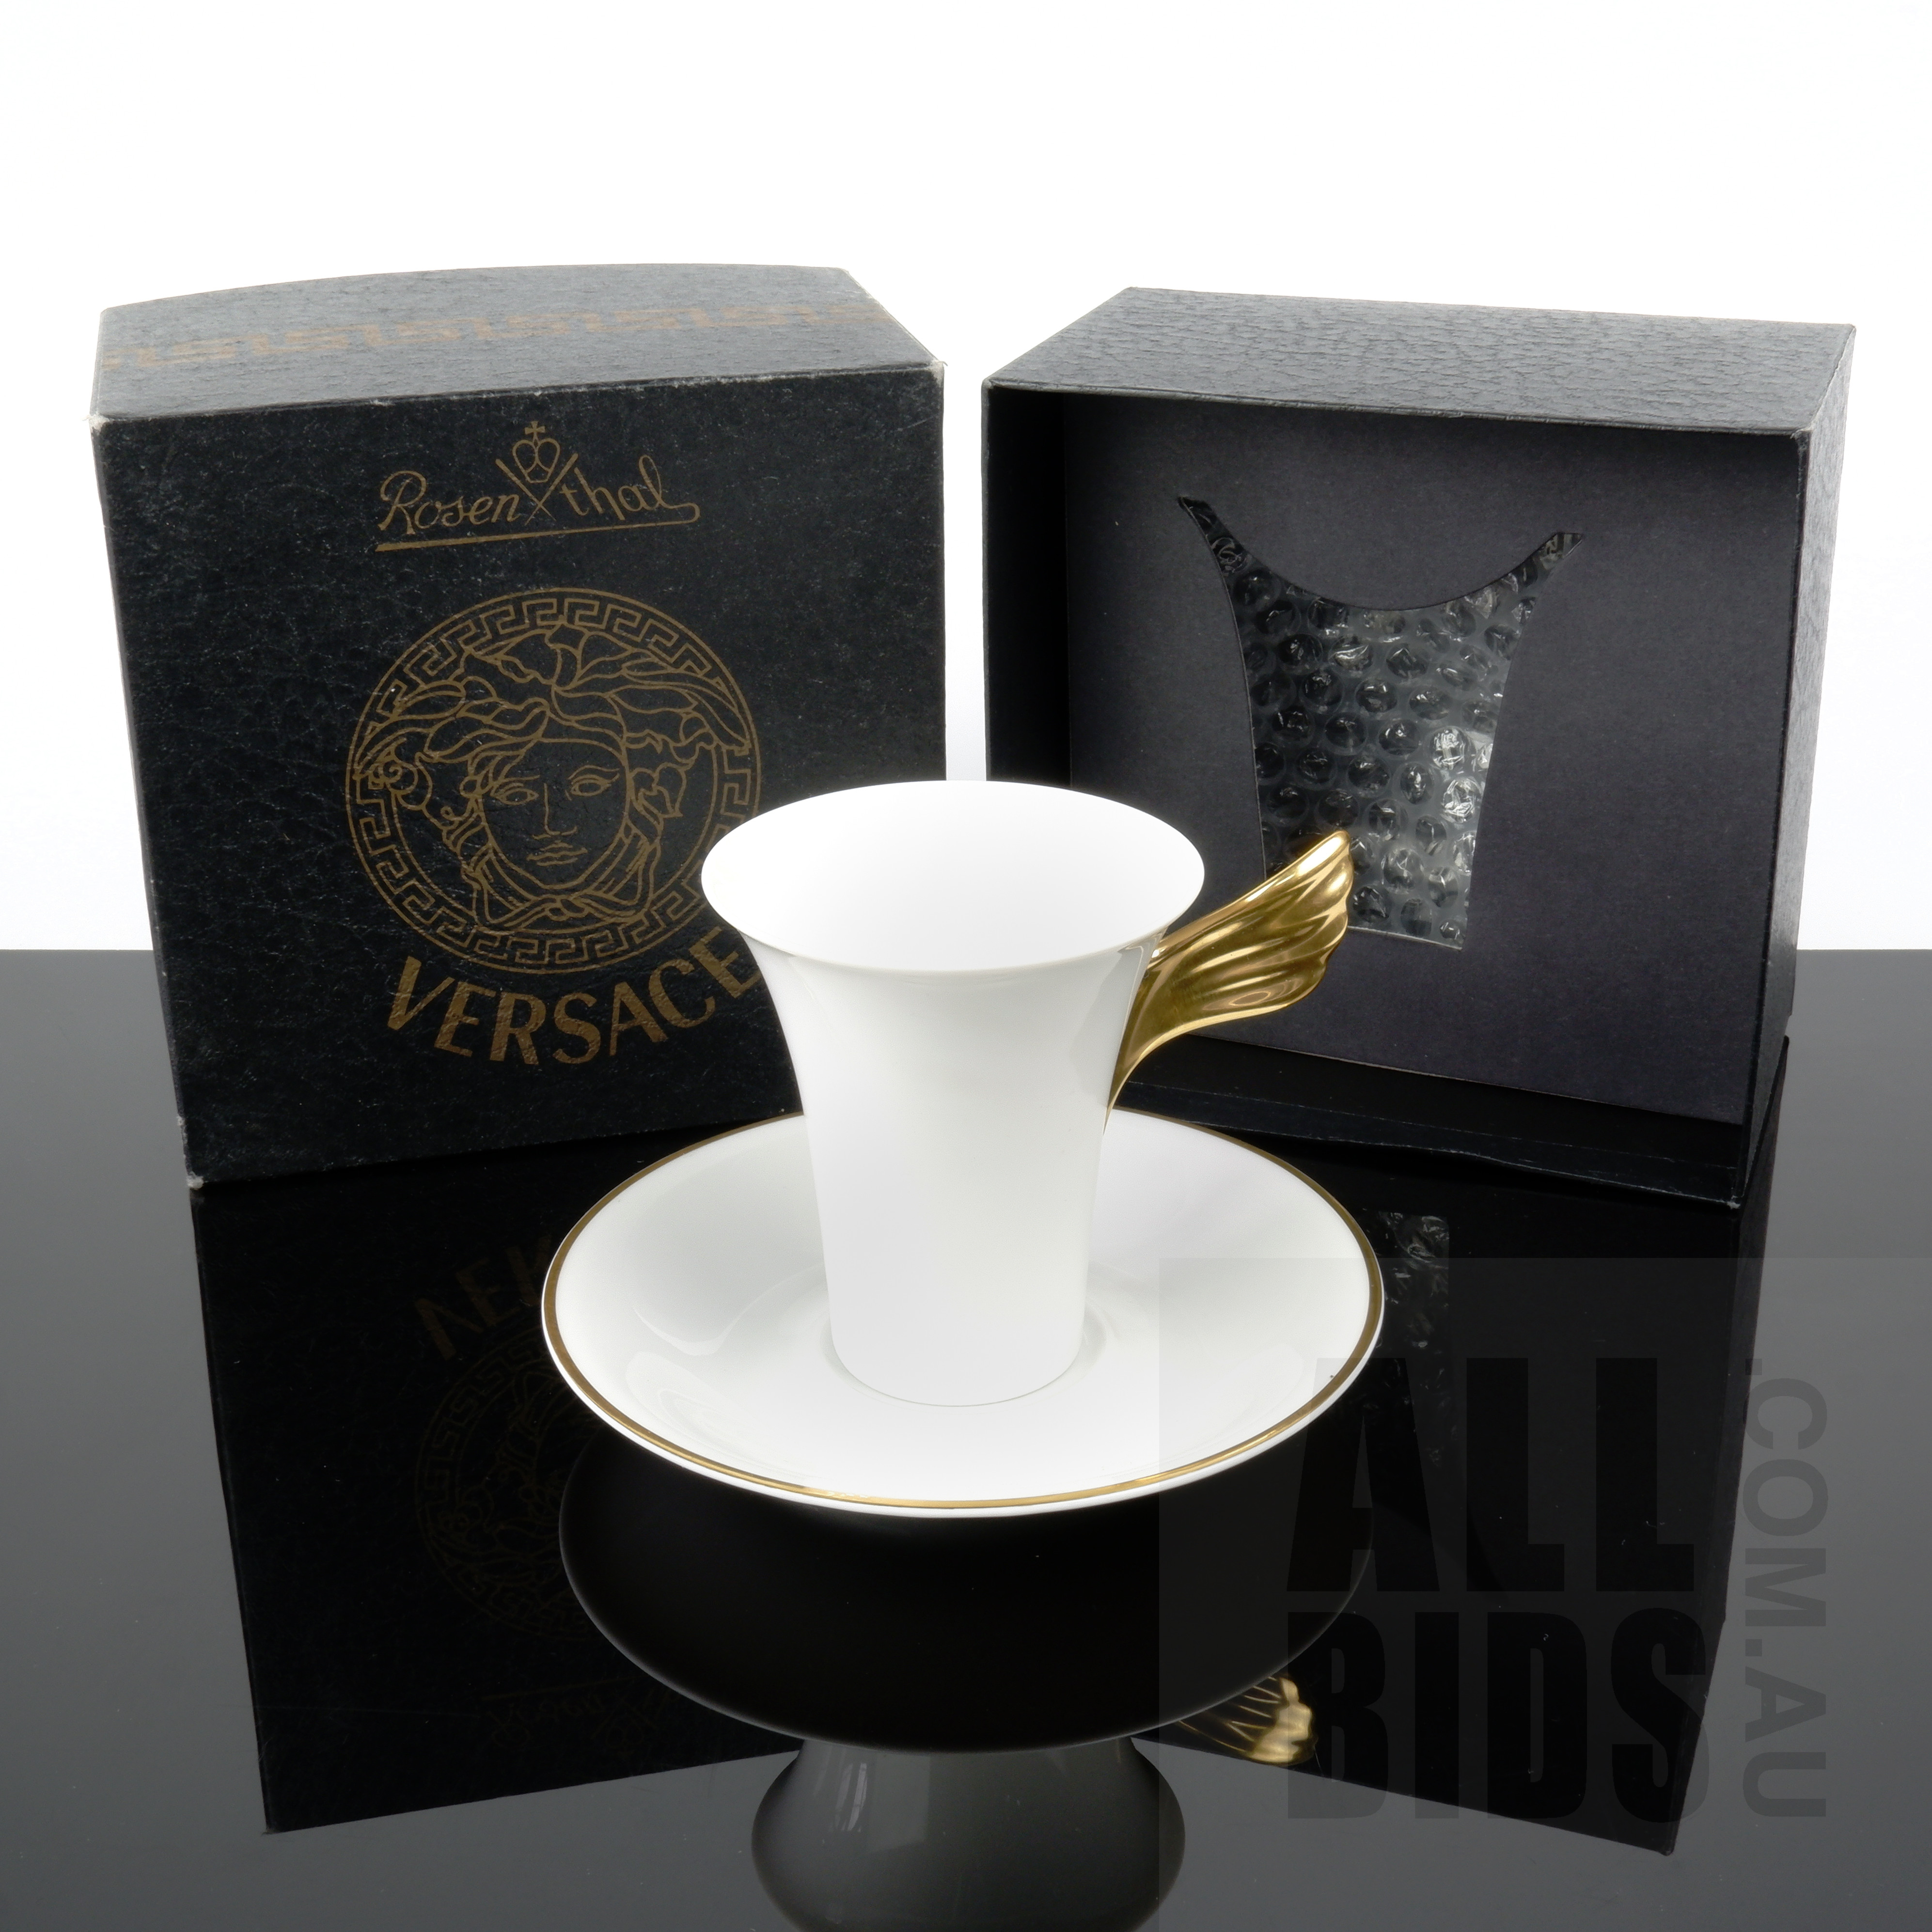 '6th of 8 Available - One As New Boxed Versace Special Edition Nescafe Gold Gilt Porcelain Coffee Cup and Saucer Manufactured by Rosenthal Studio-Line'